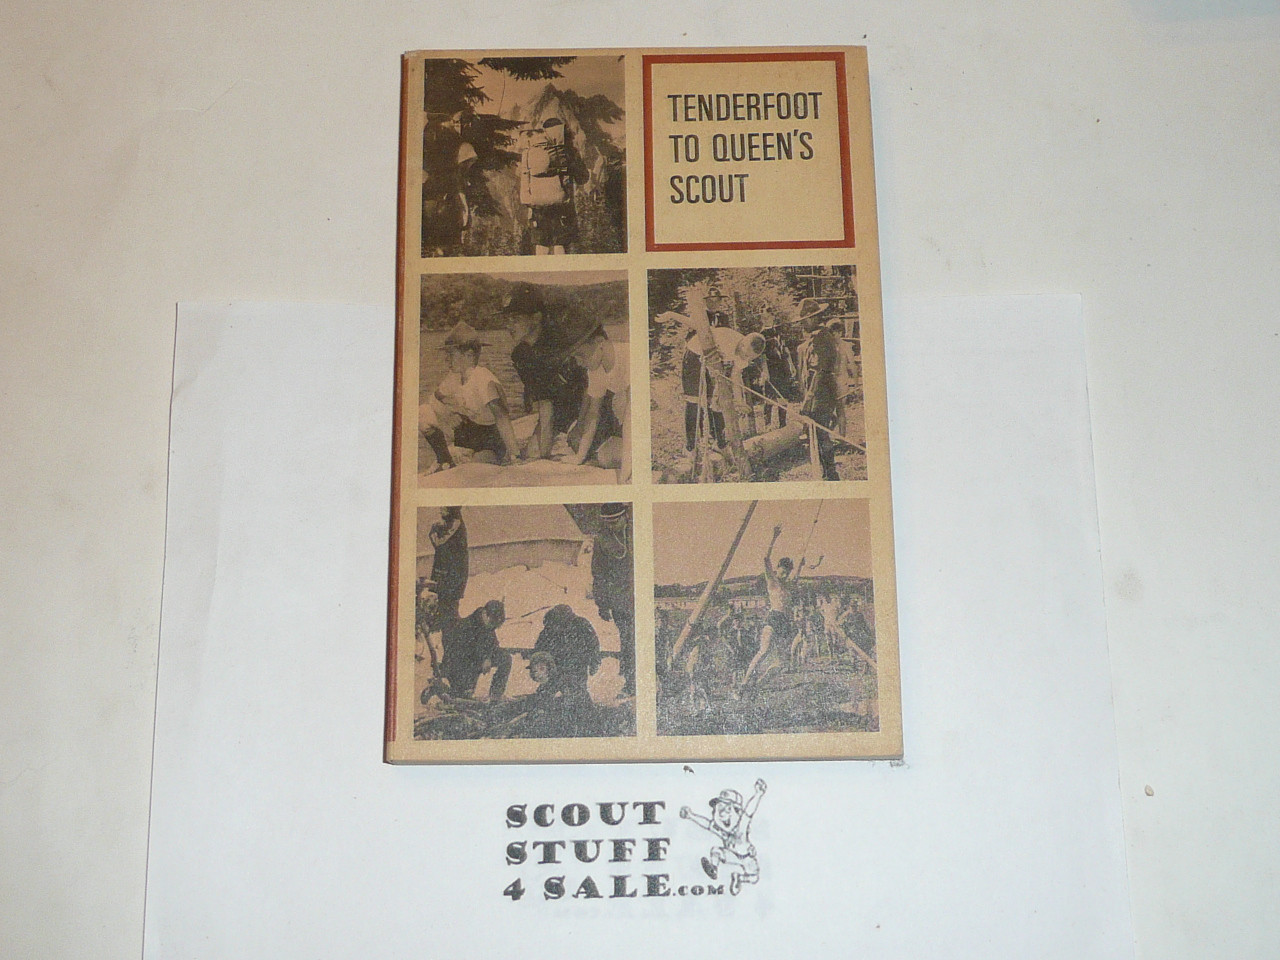 1965 Tenderfoot to Queen's Scout Book, Canadian